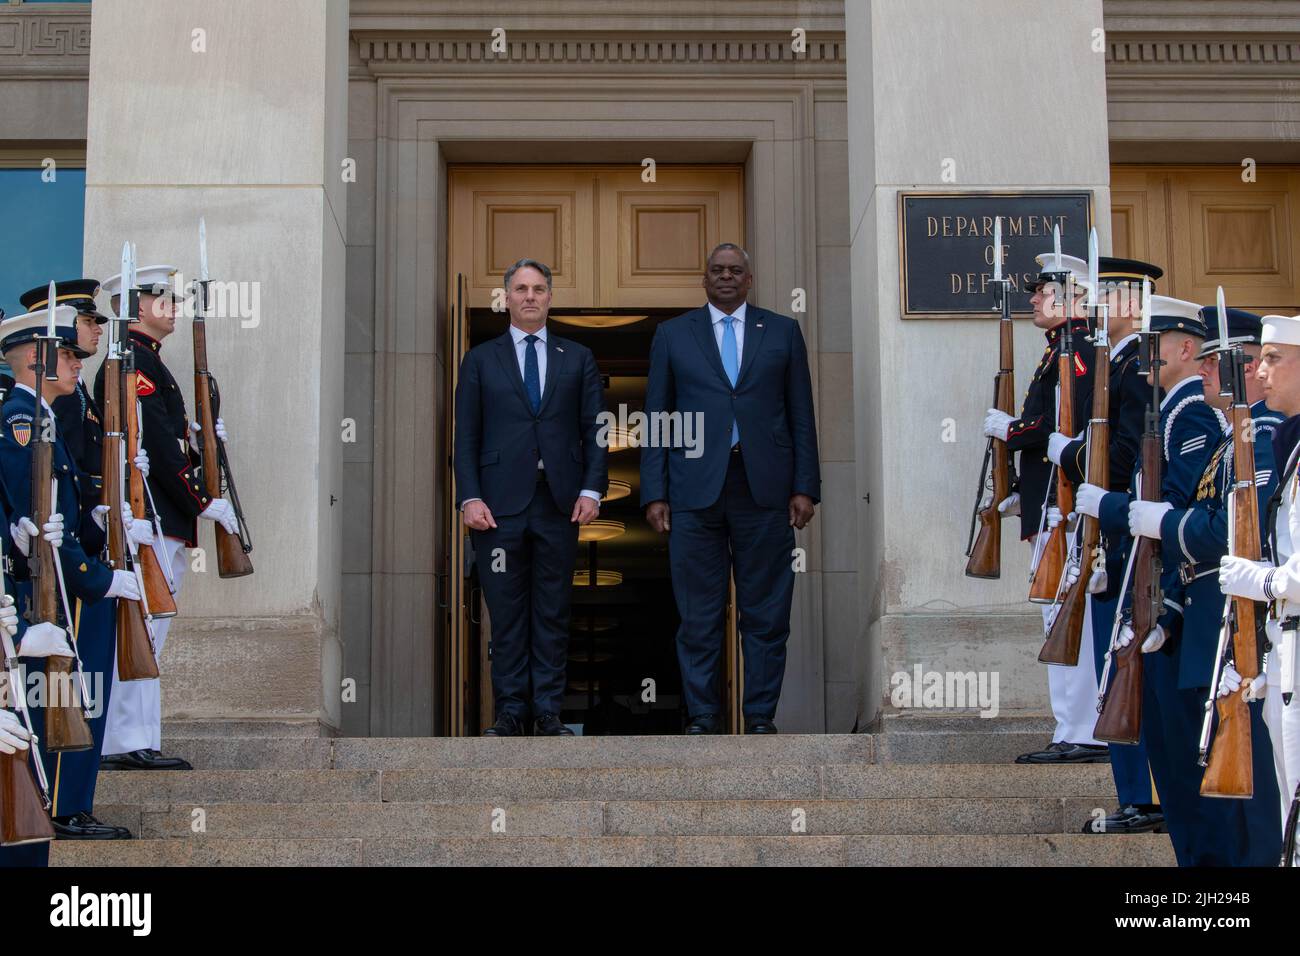 Arlington, United States Of America. 13th July, 2022. Arlington, United States of America. 13 July, 2022. U.S. Secretary of Defense Lloyd J. Austin III, right, stands with Australian Deputy Prime Minister and Defense Minister Richard Marles on arrival at the Pentagon, July 13, 2022 in Arlington, Virginia. Credit: MC2 James K Lee/DOD/Alamy Live News Stock Photo